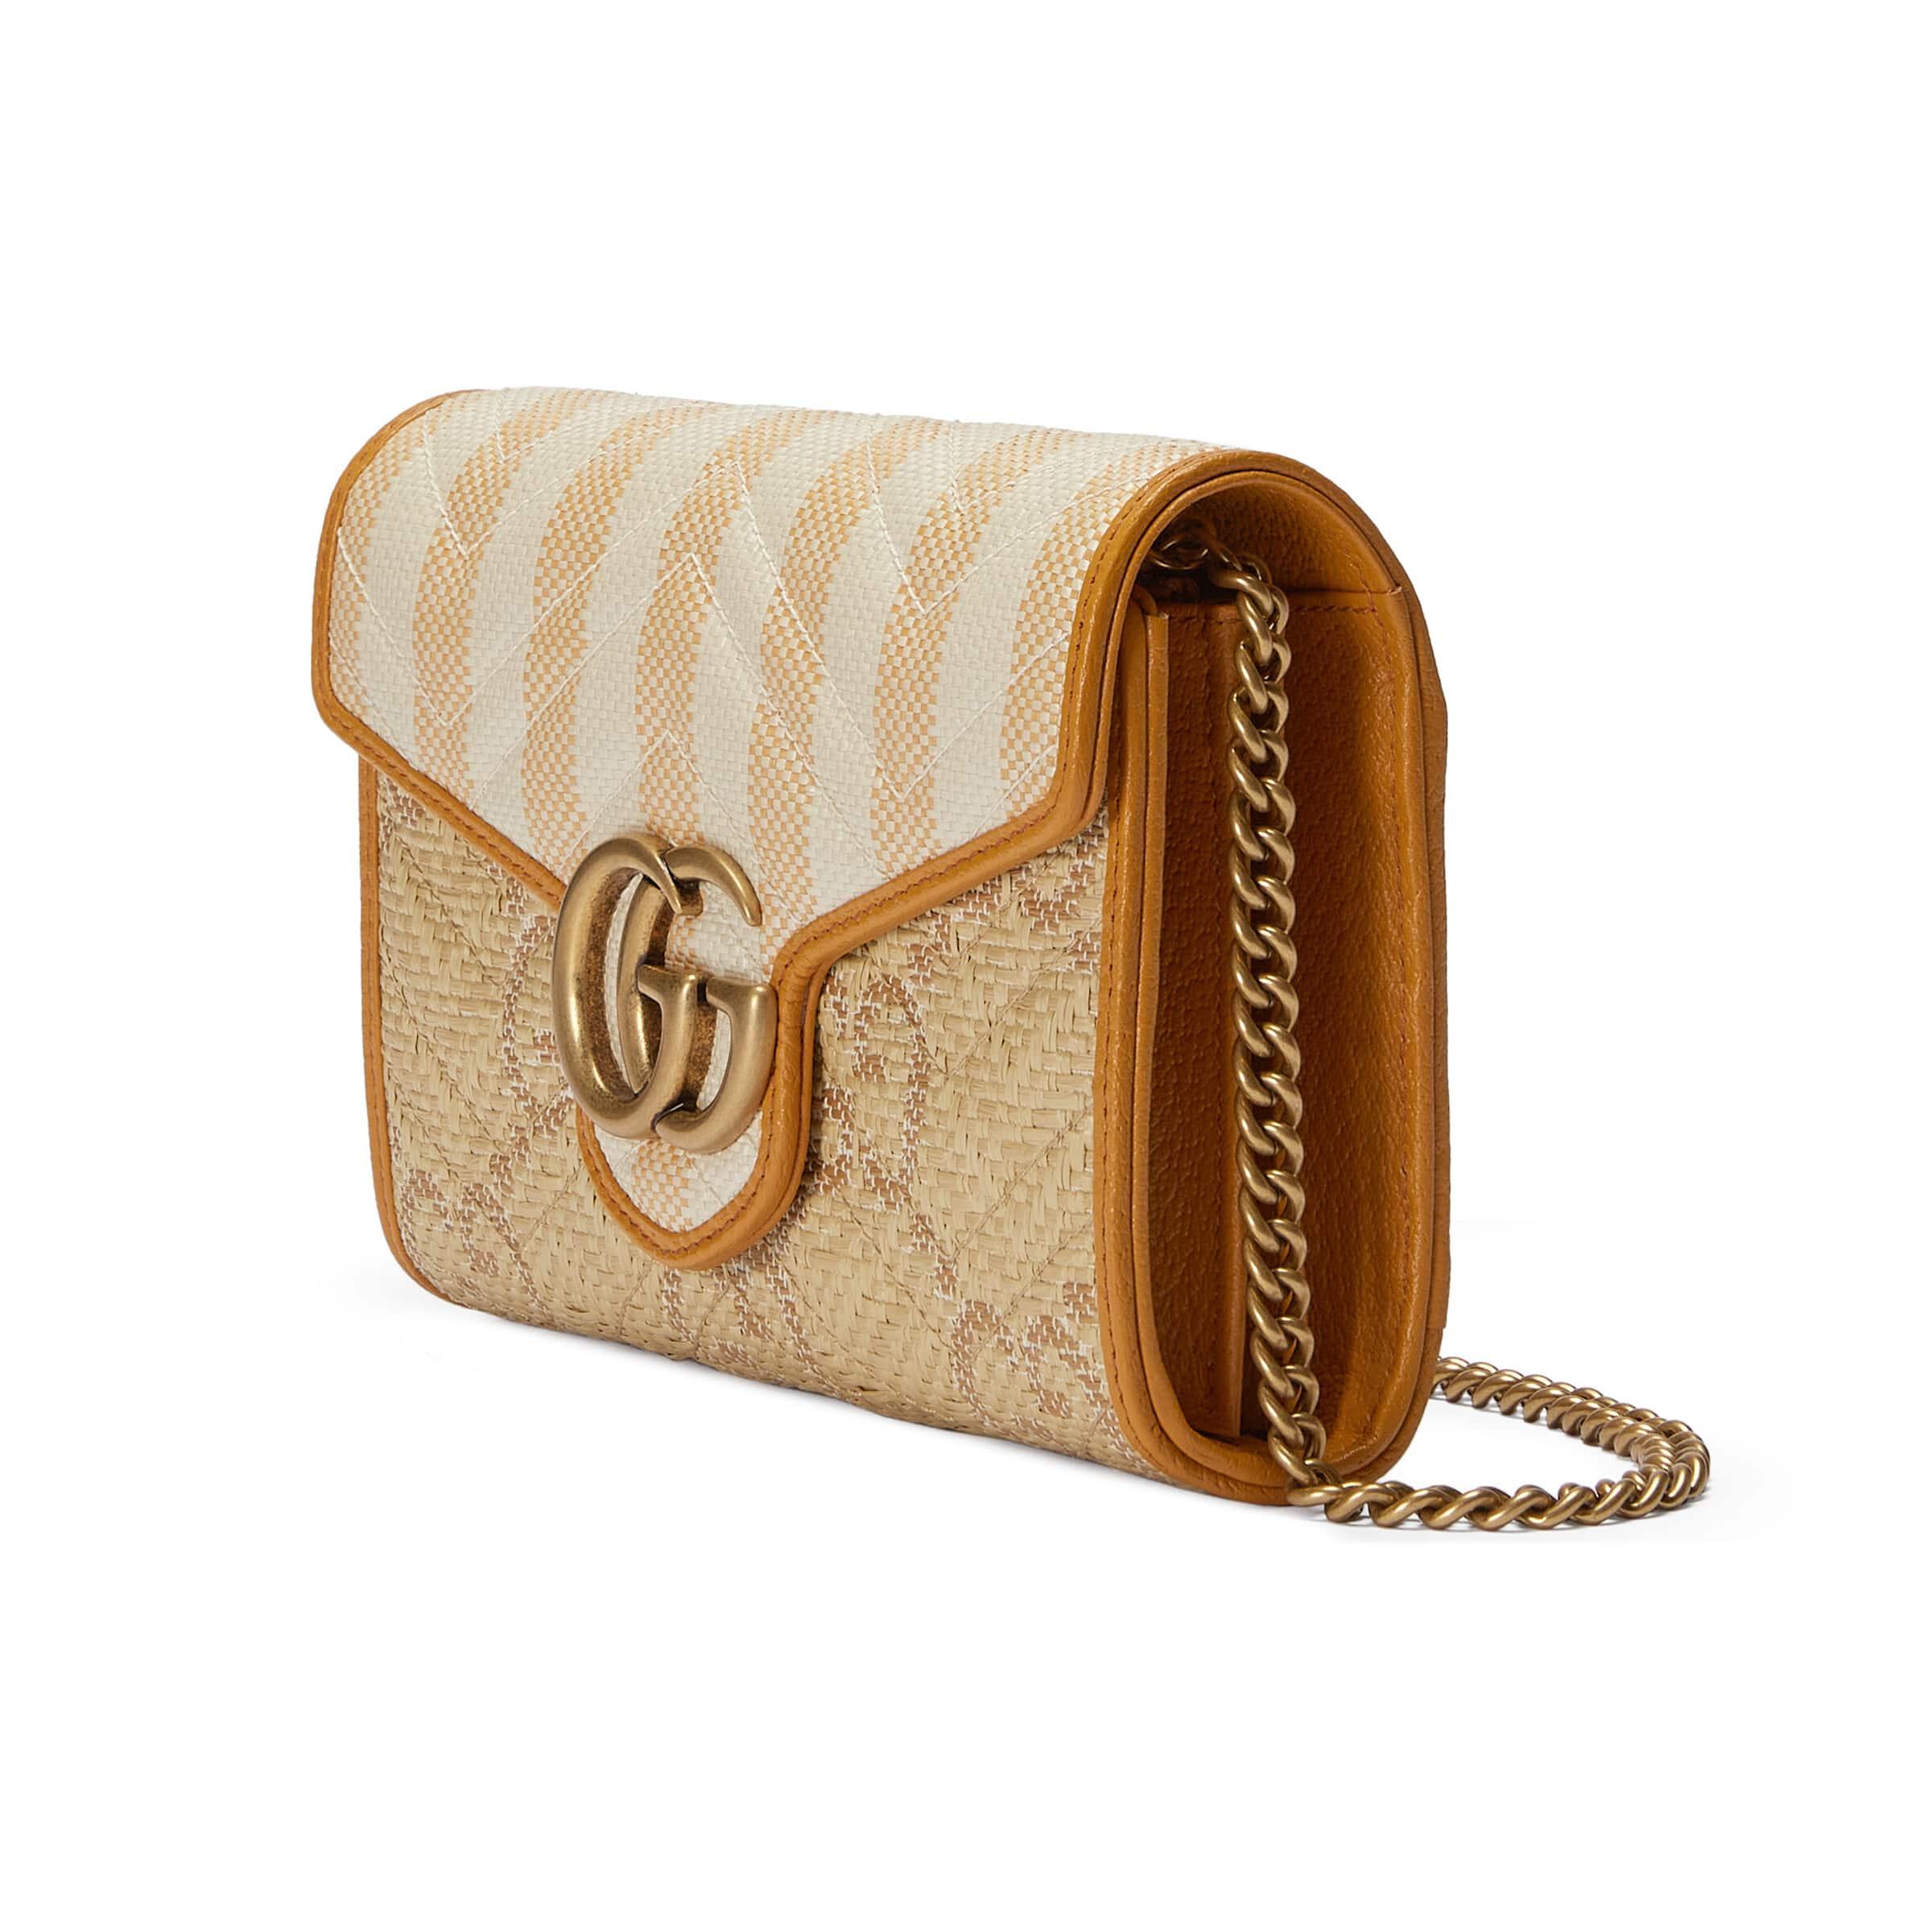 GUCCI GG Marmont 2.0 quilted leather shoulder bag